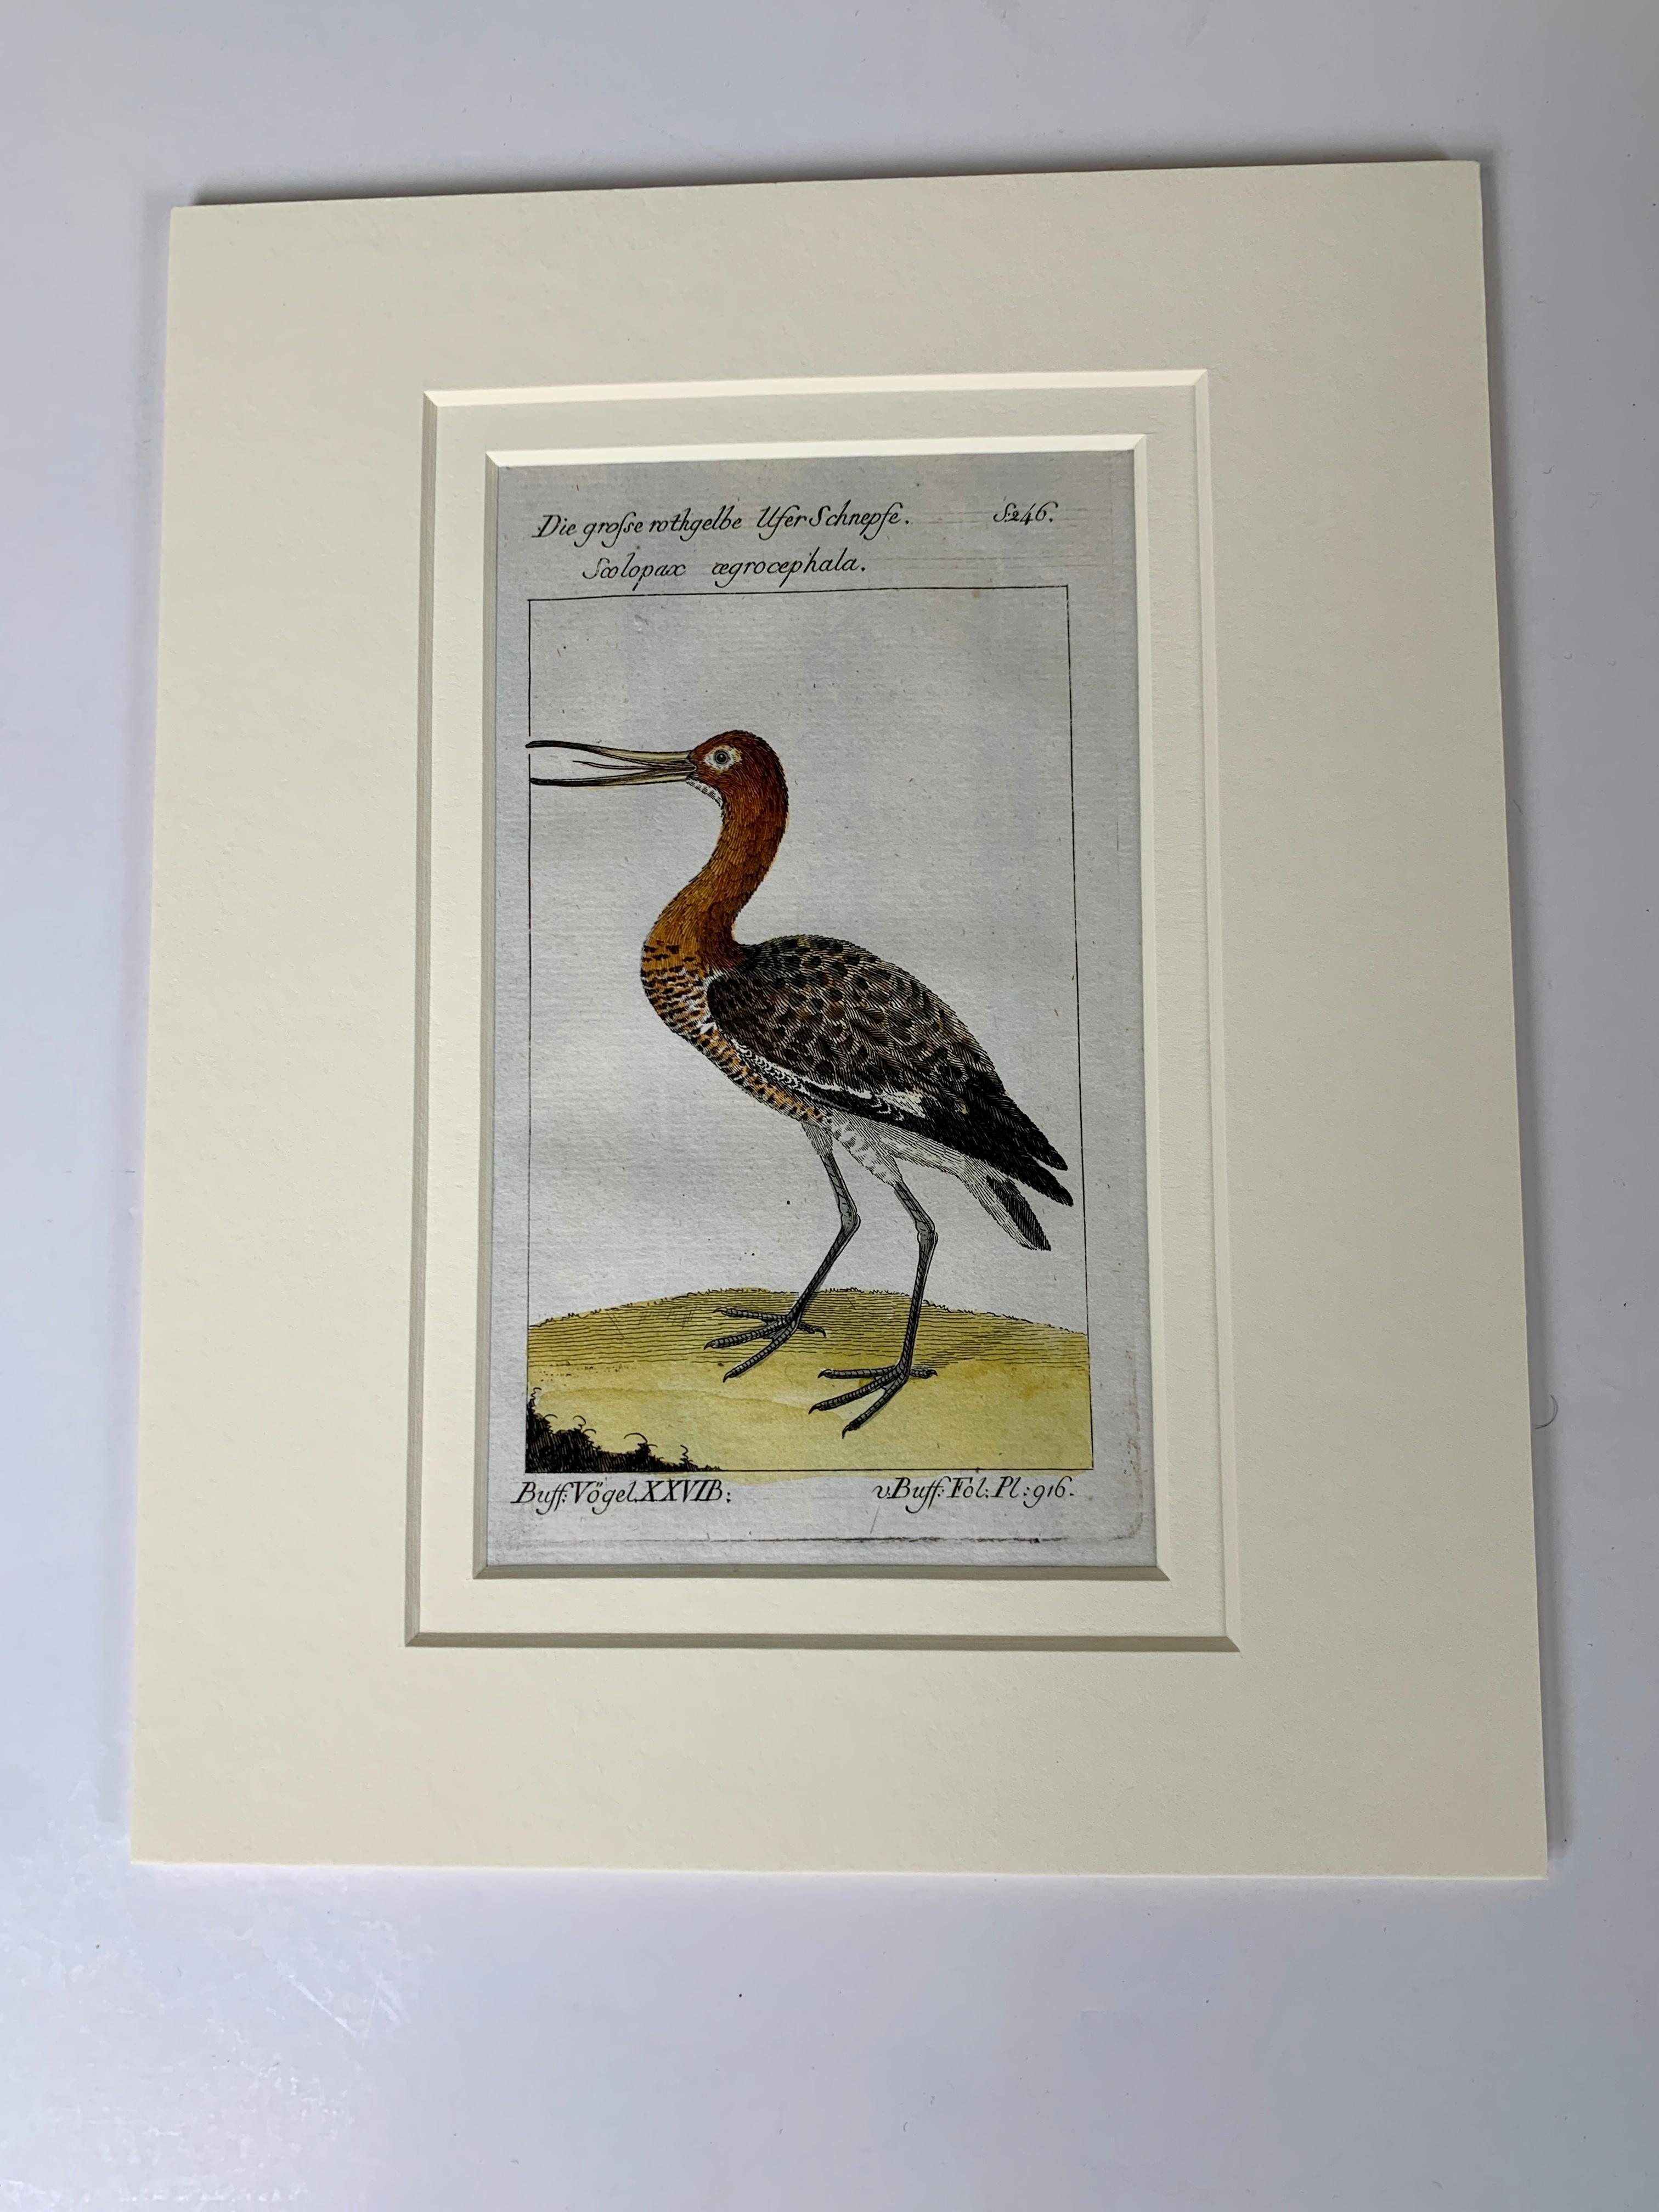 We are pleased to offer these Individual bird scenes captured on paper in the Audubon bird engravings style.
These small, gem-like, hand-colored engravings represent the rare and compelling ornithological drawings of the influential naturalist and